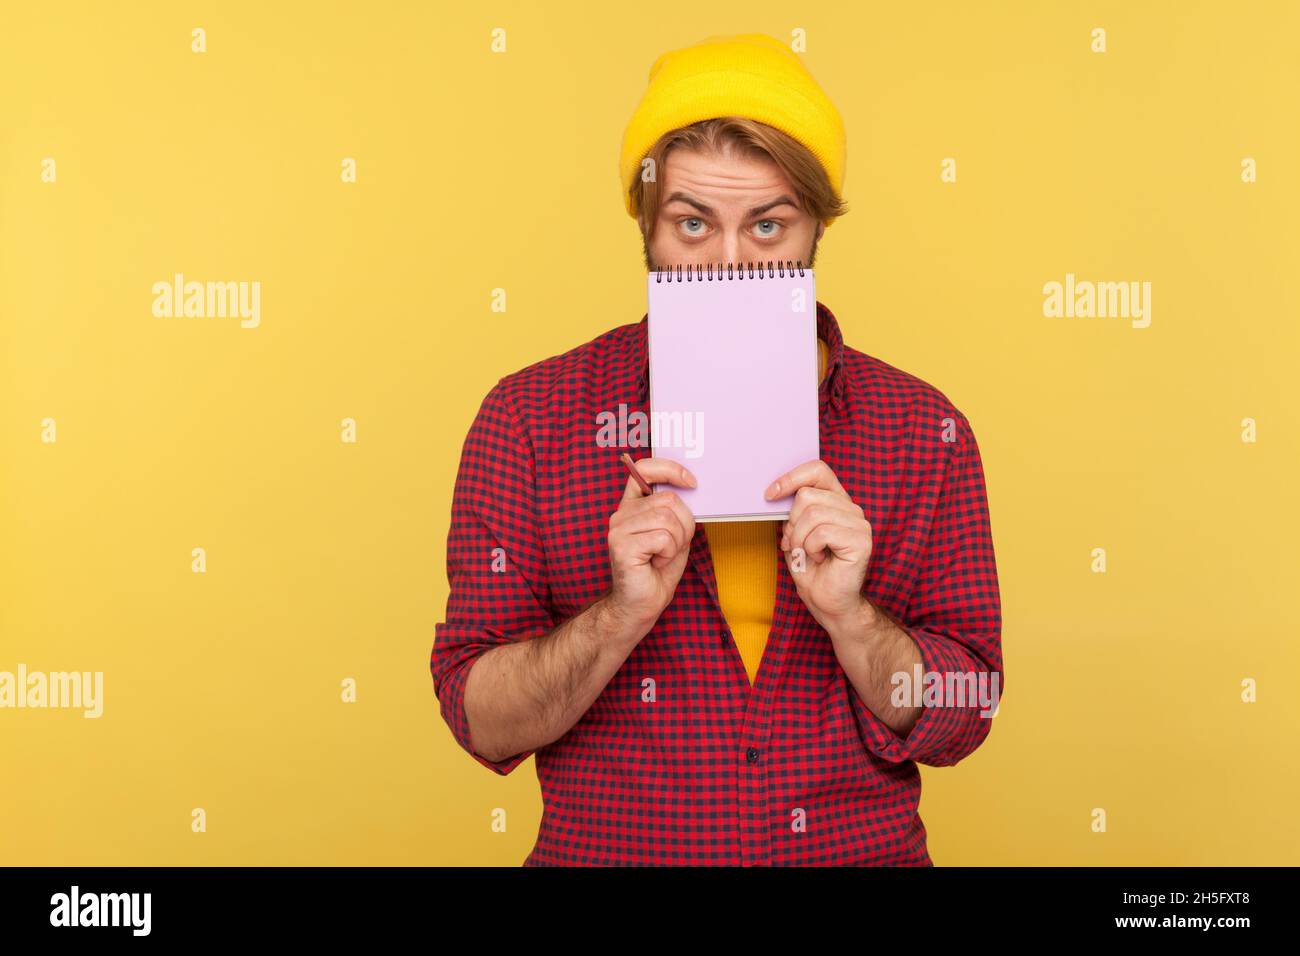 Portrait of hipster bearded guy in beanie hat and checkered shirt standing covering half of face with paper notebook, looking at camera. Indoor studio shot isolated on yellow background. Stock Photo